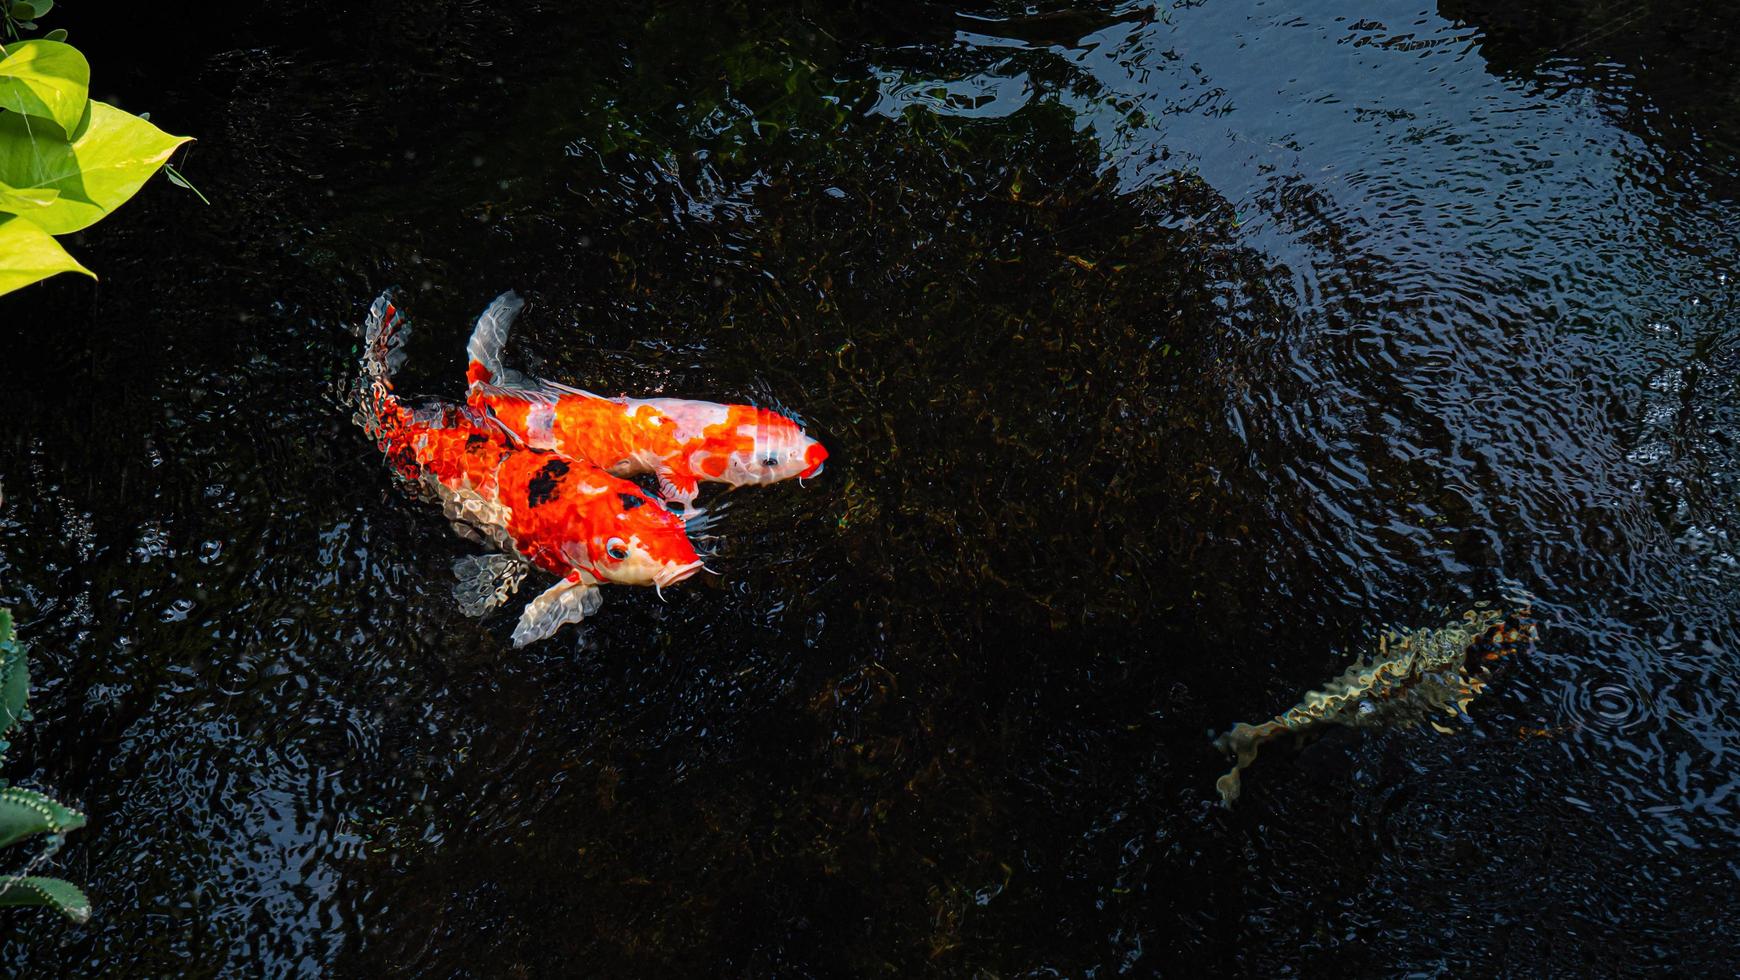 Japan koi fish or Fancy Carp swimming in a black pond fish pond. Popular pets for relaxation and feng shui meaning. Popular pets among people. Asians love to raise it for good fortune. photo